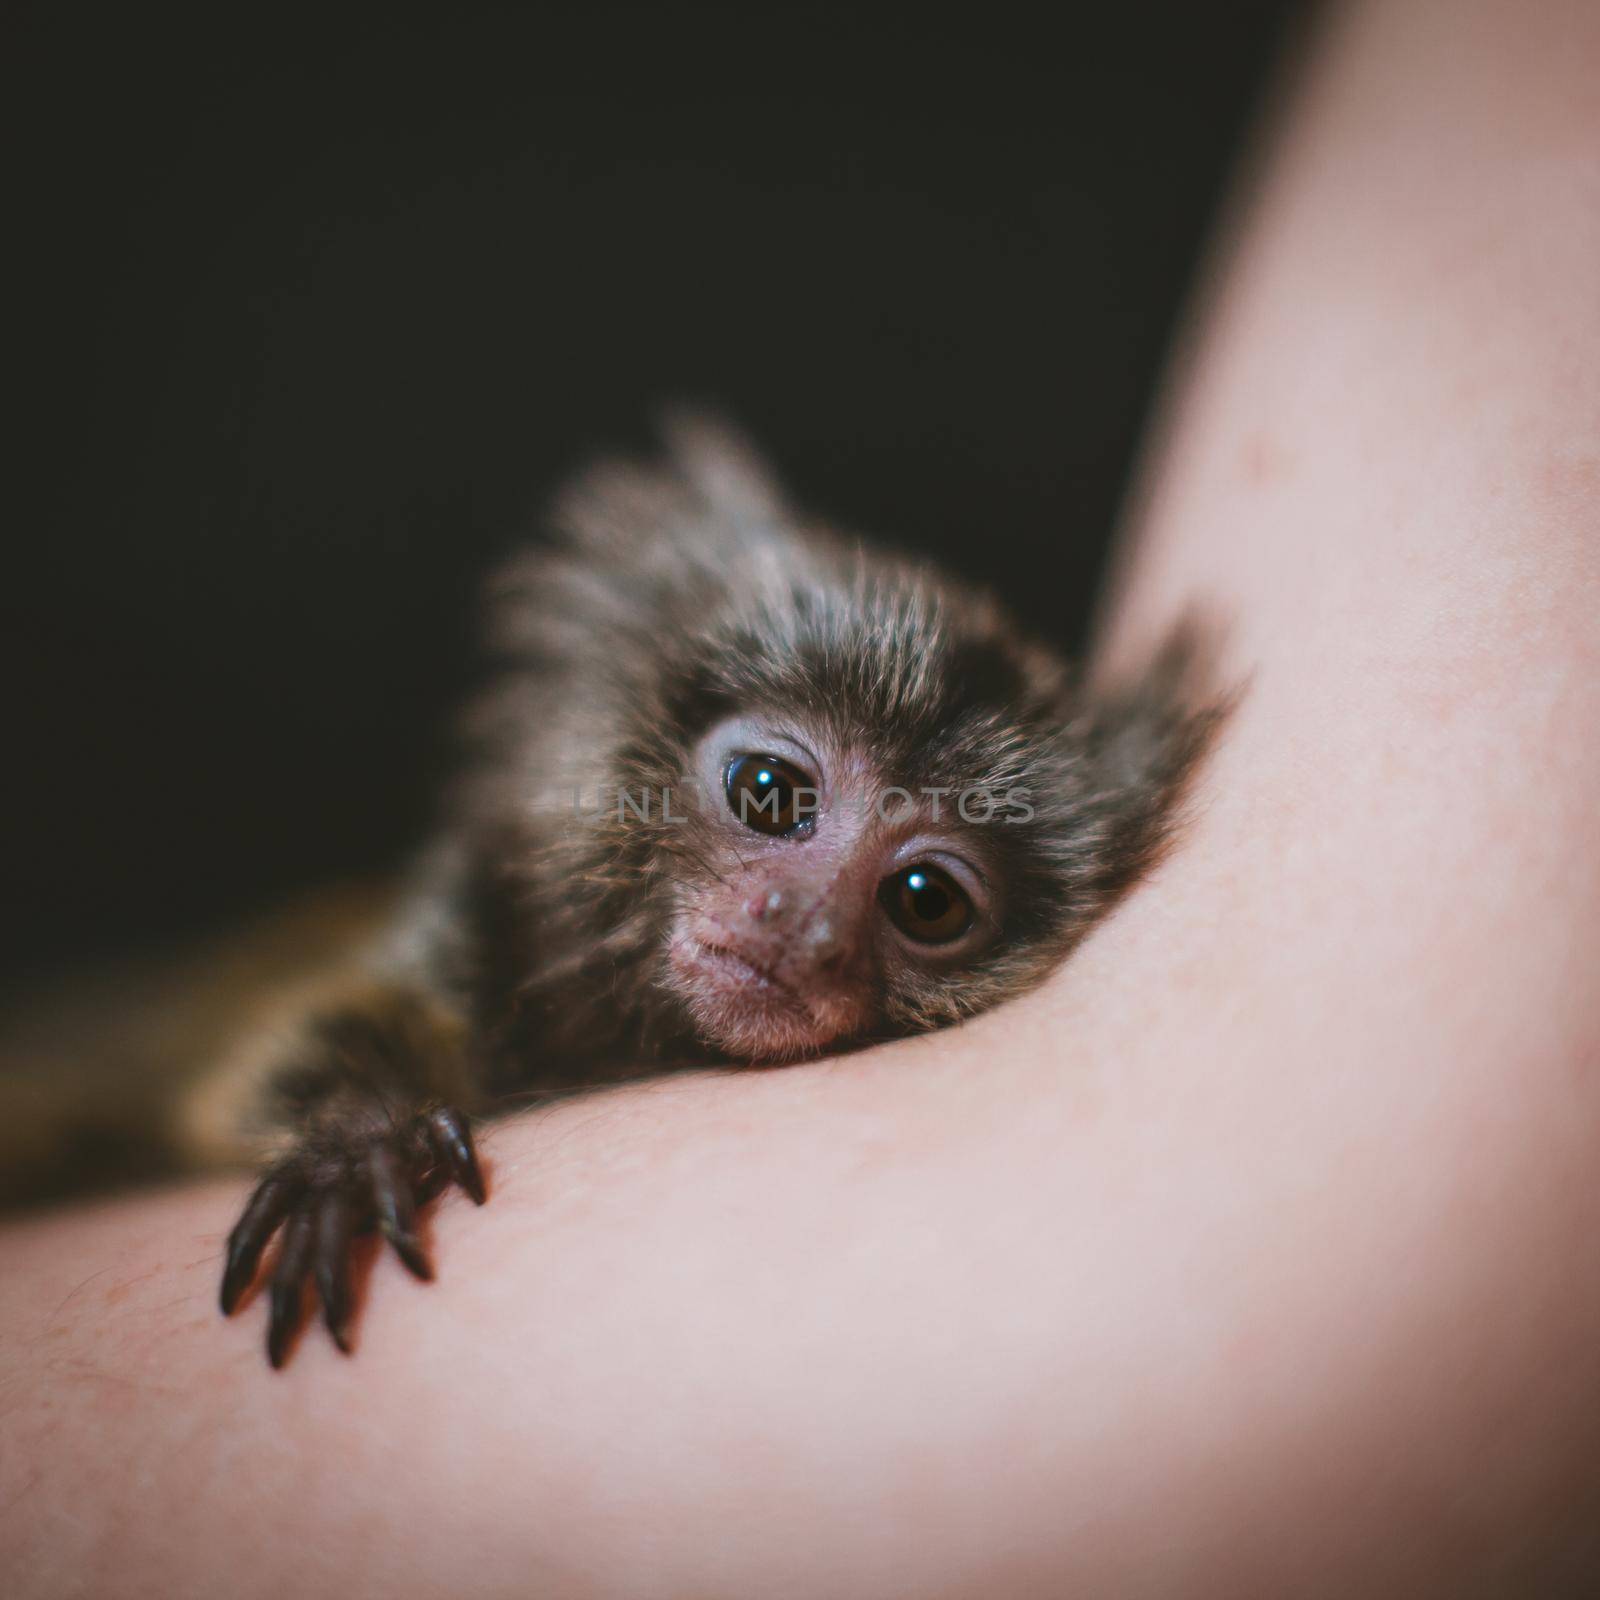 The new born common marmosets, Callithrix jacchus, 2 months old, isolated on black background